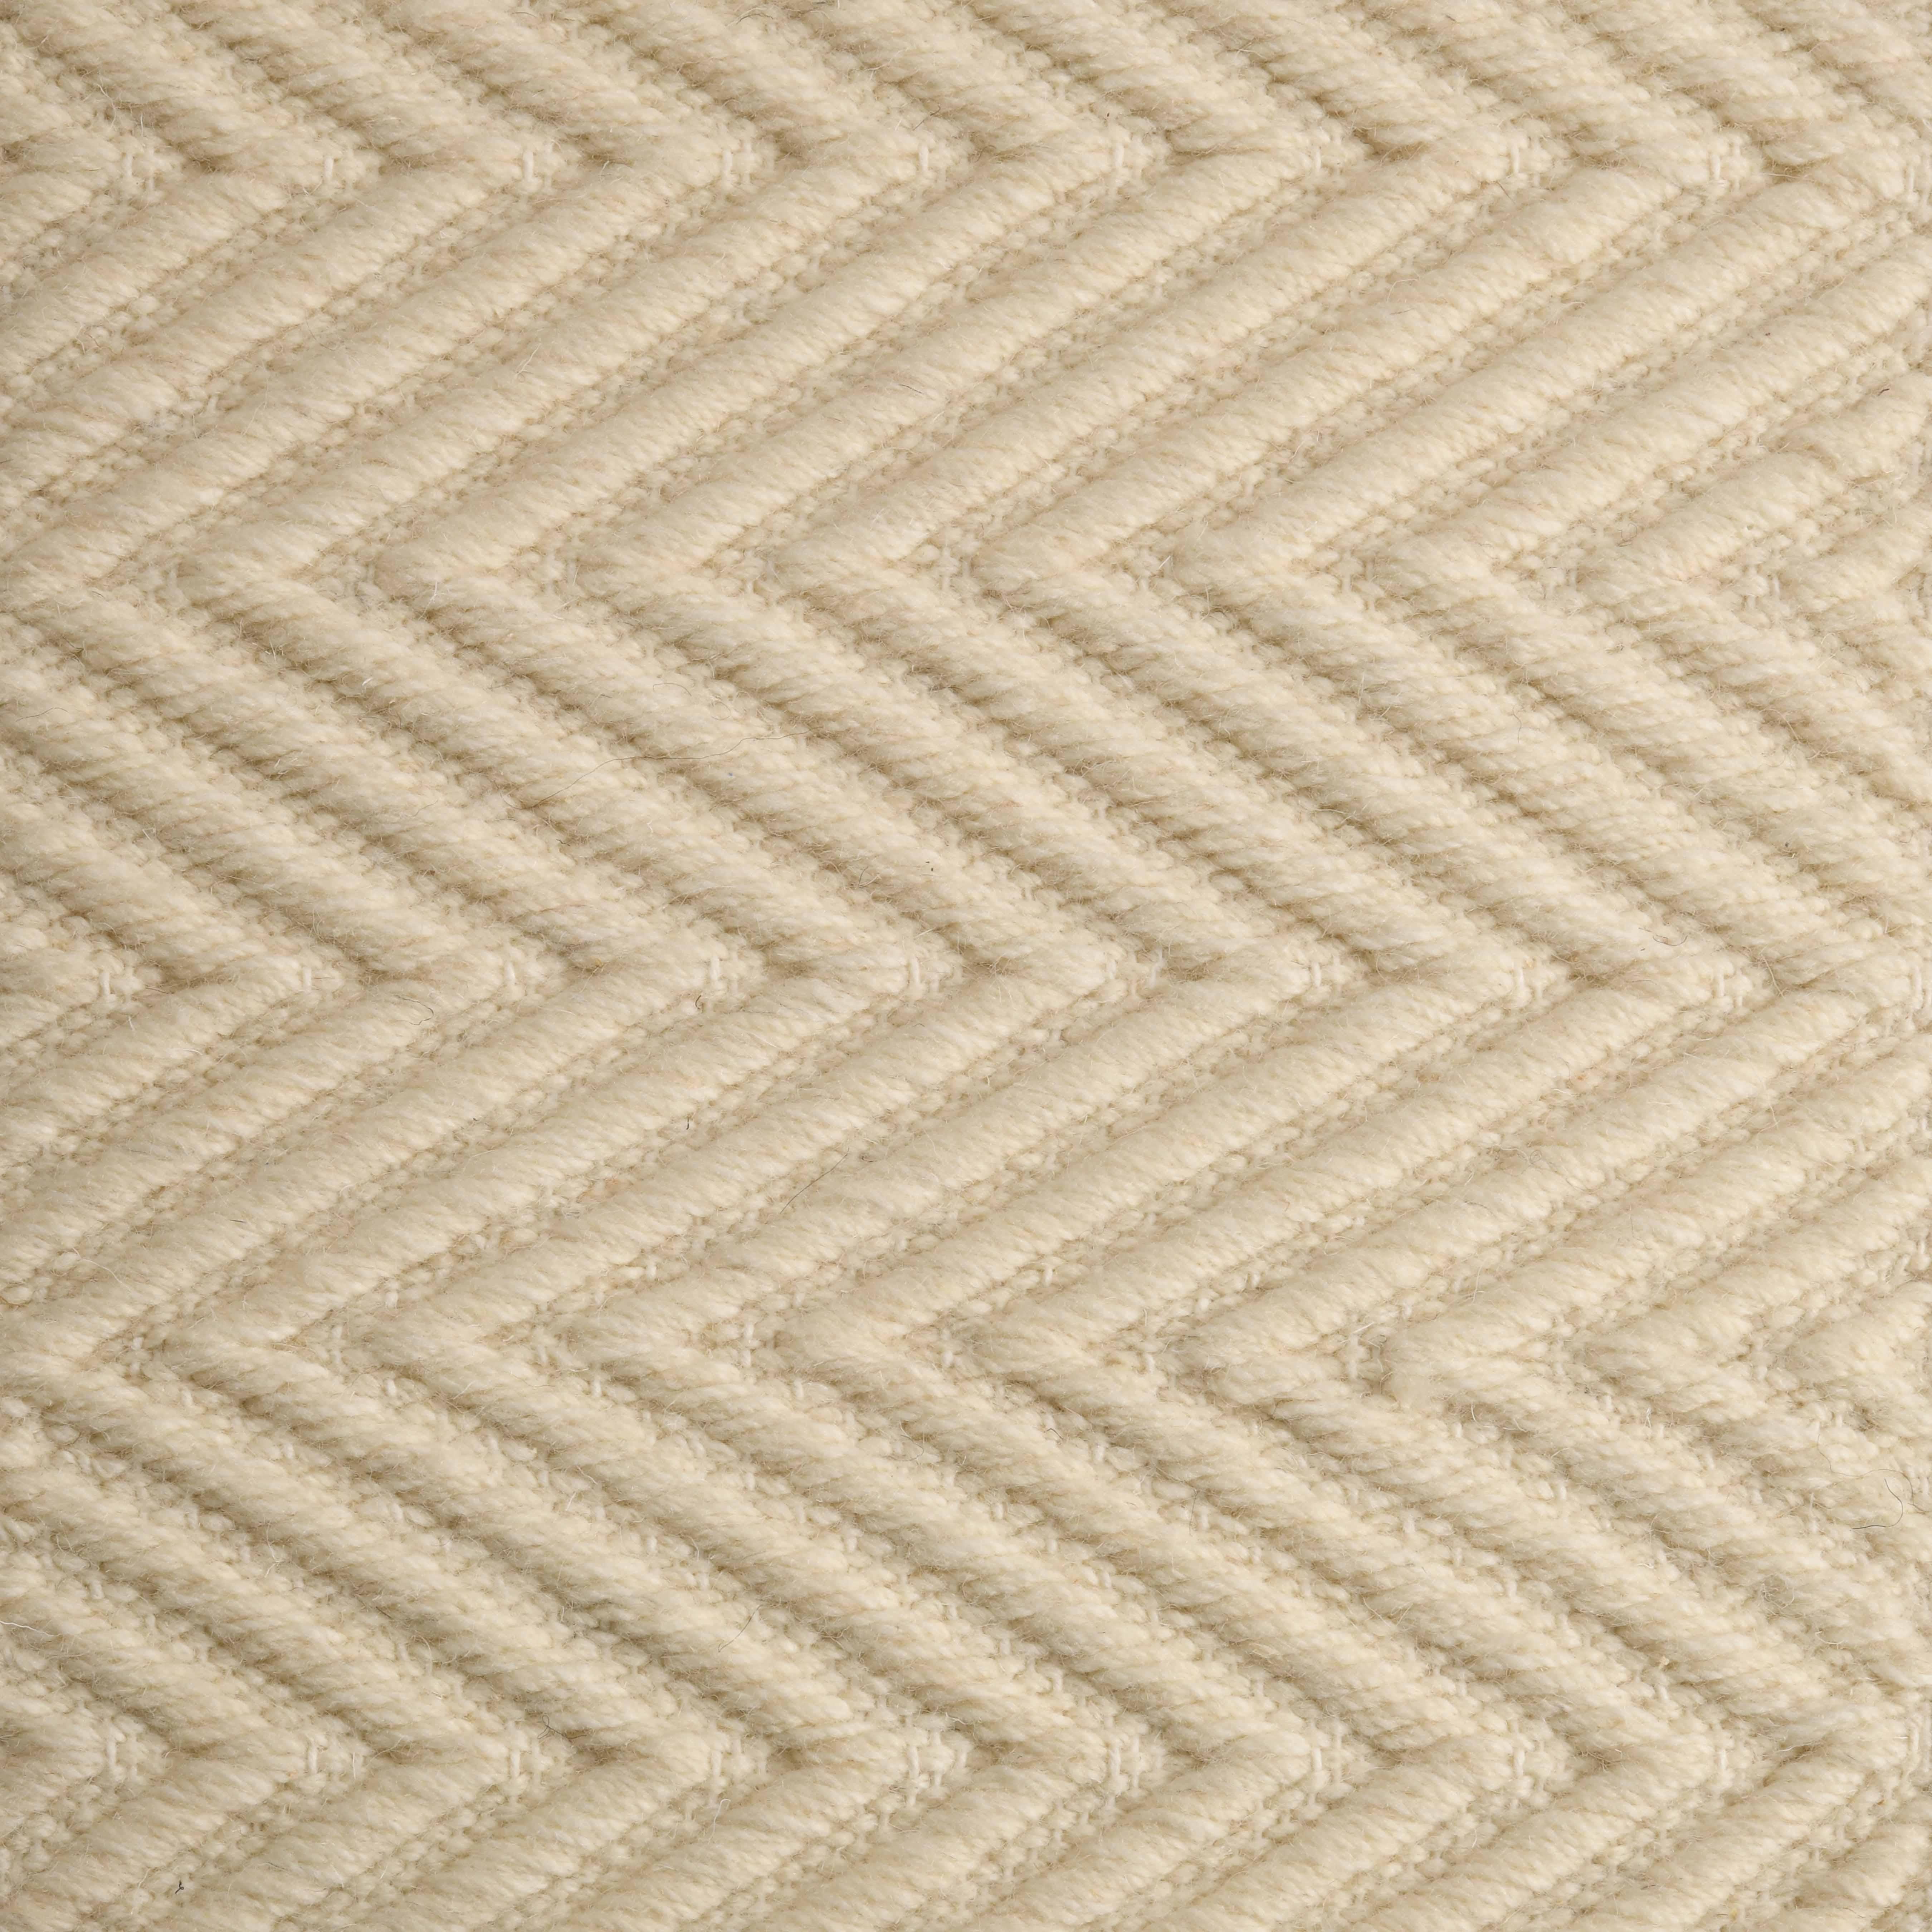 Lanx, Ivory, Handwoven Face 60% Undyed NZ Wool, 40% Undyed MED Wool, 8' x 10' For Sale